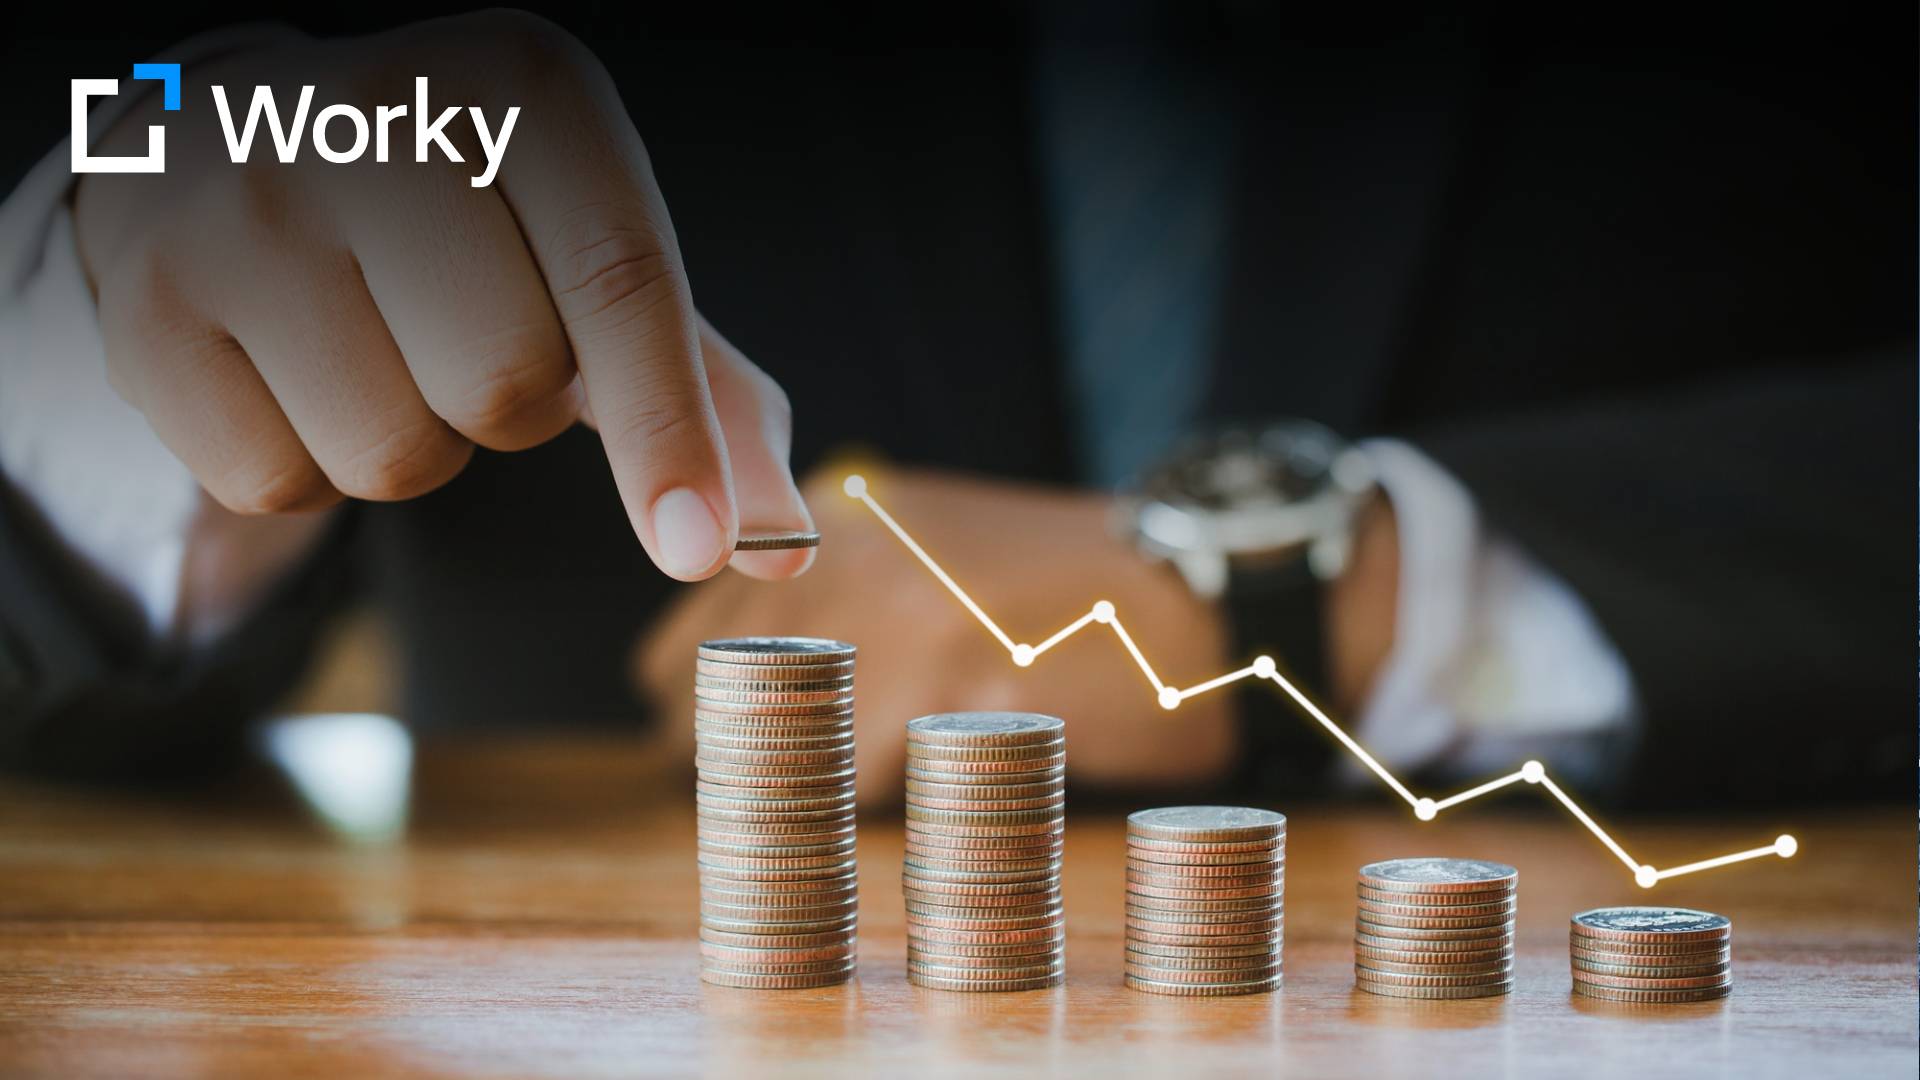 Worky Secures $6 Million Series A Funding to Revolutionize HR and Payroll for Mexican Businesses